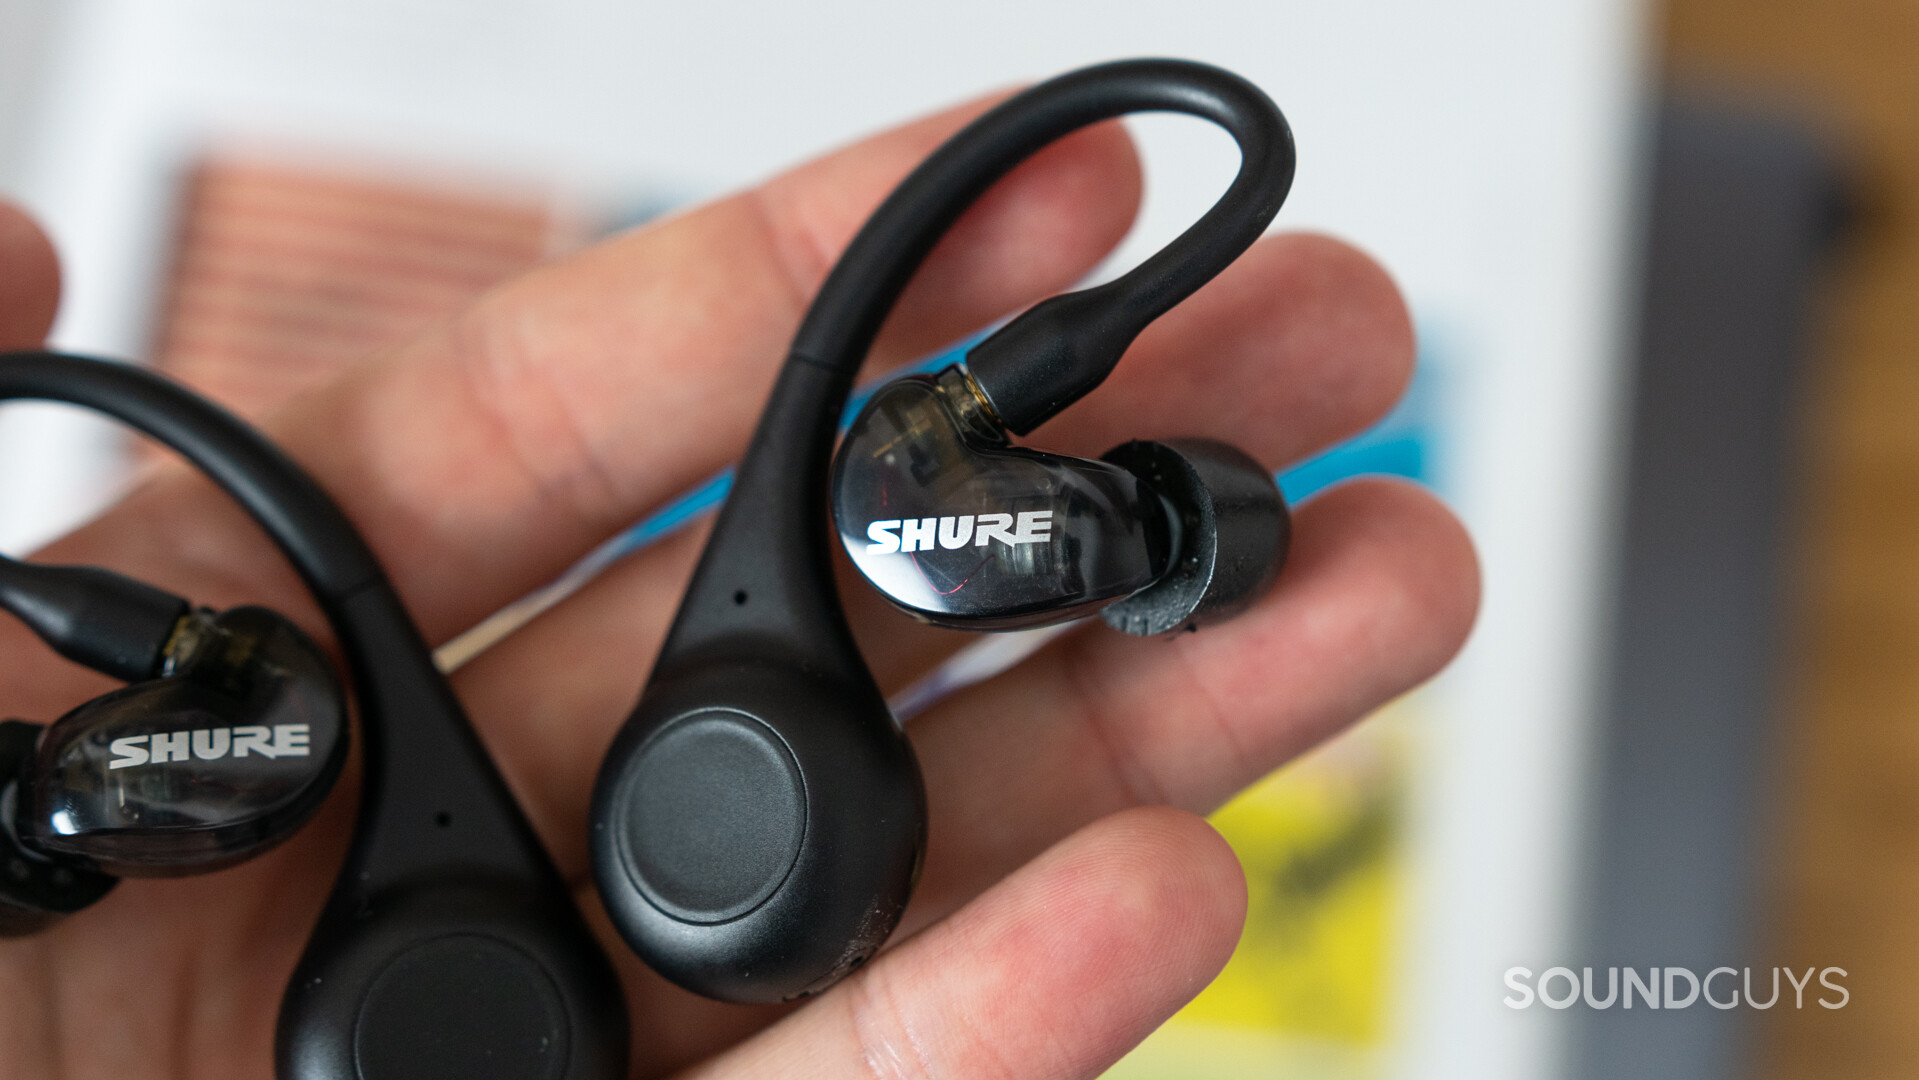 Shure AONIC 215 review: Amazing sound on a cumbersome body